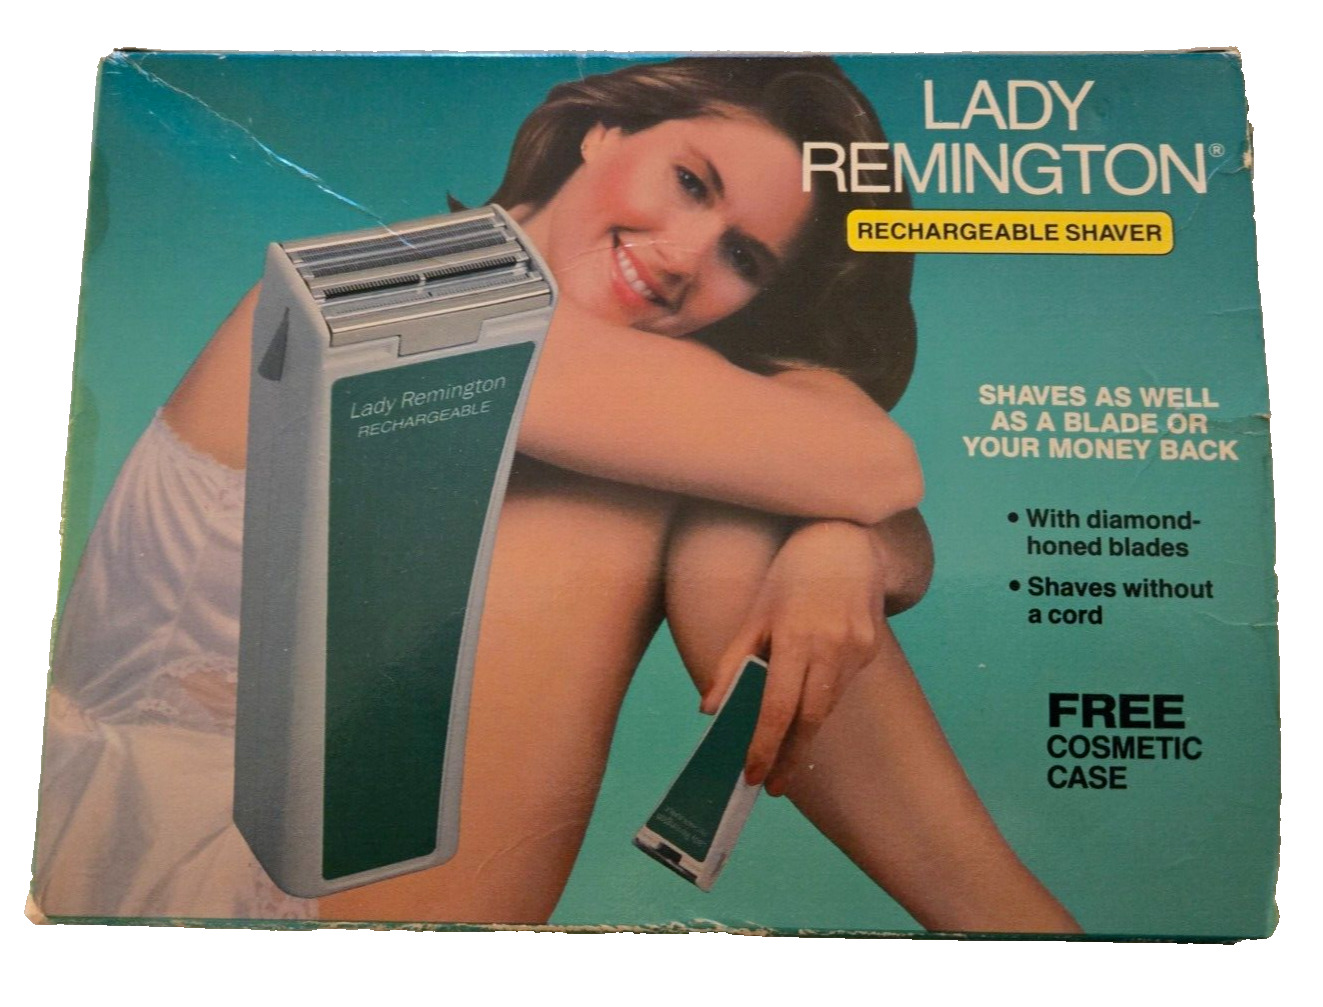 Vtg. Lady Remington Rechargeable Shaver Wer-6100 1990s Personal Use Movie Prop